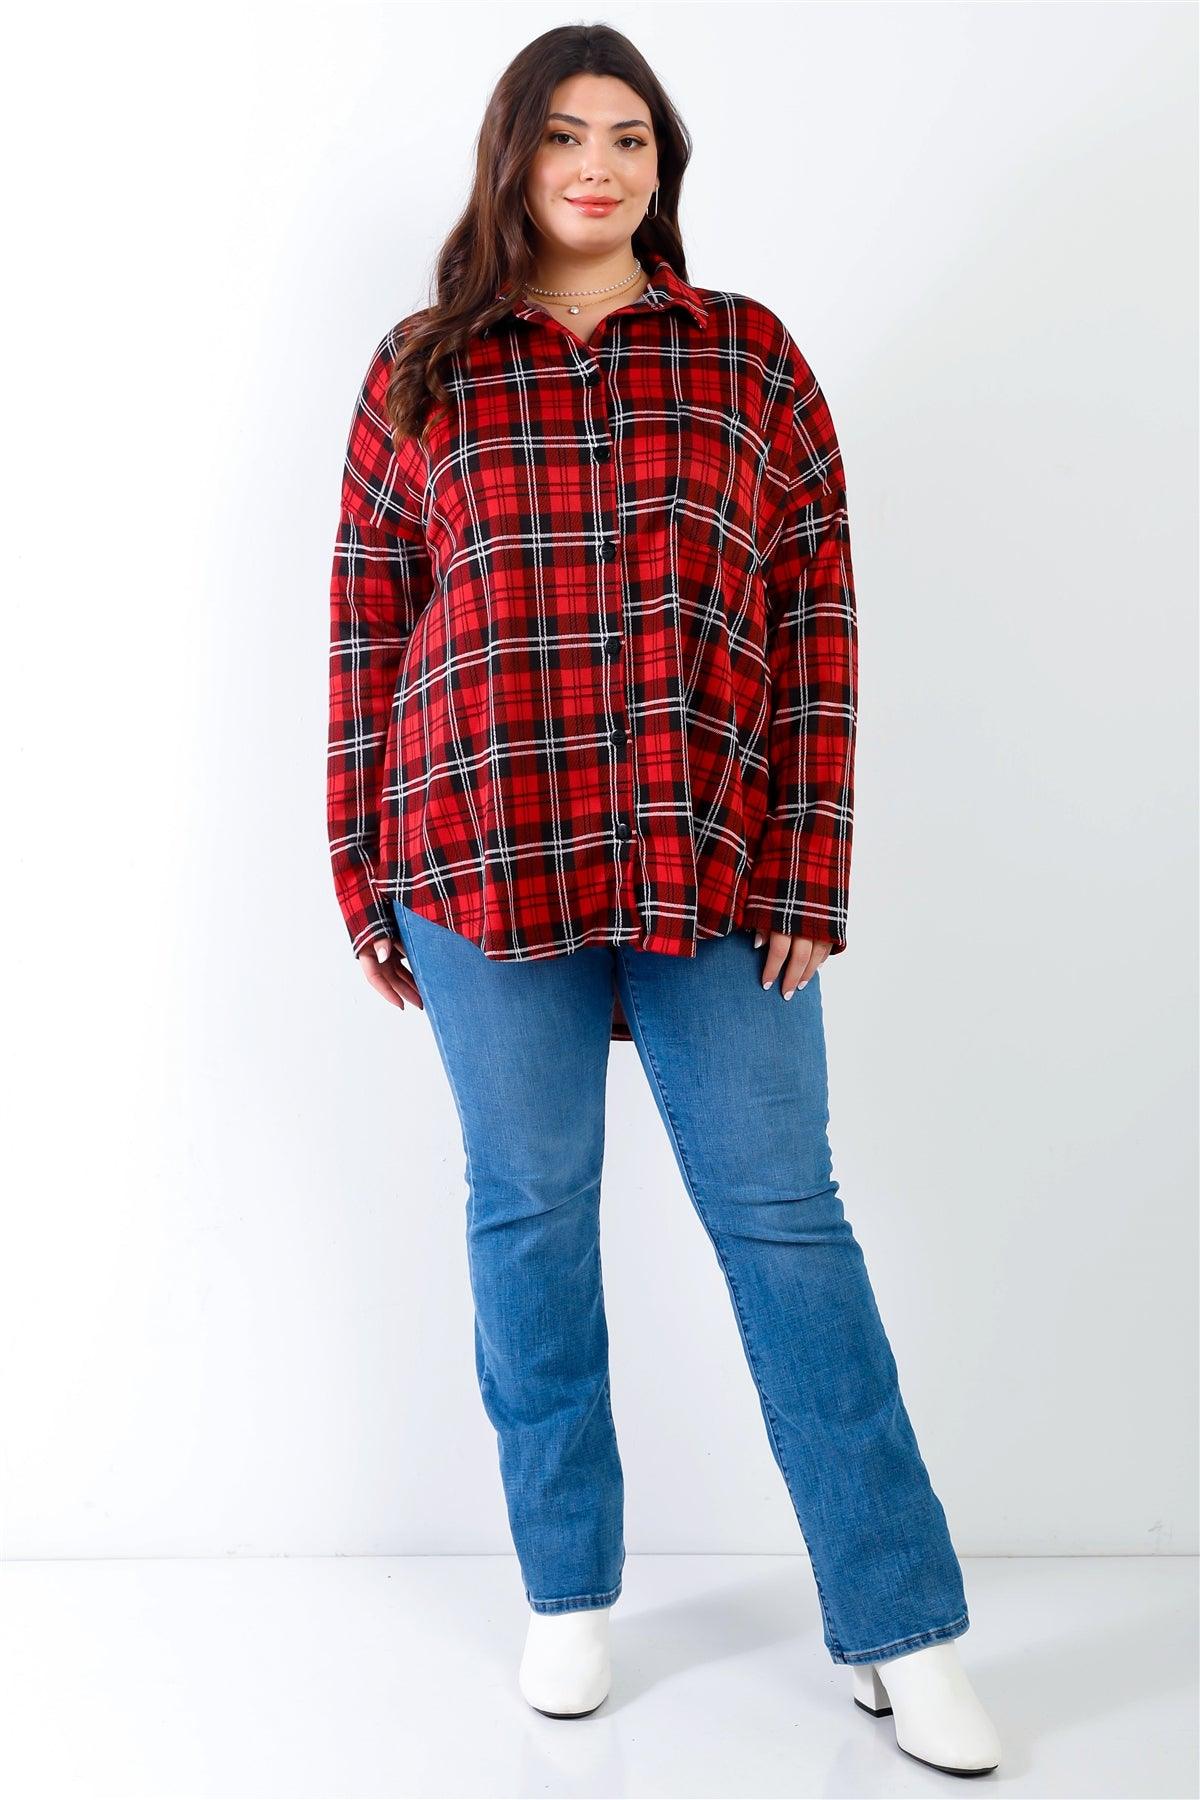 Junior Plus Black & Red Plaid Collared Button Up Shirt Top /2-2-2